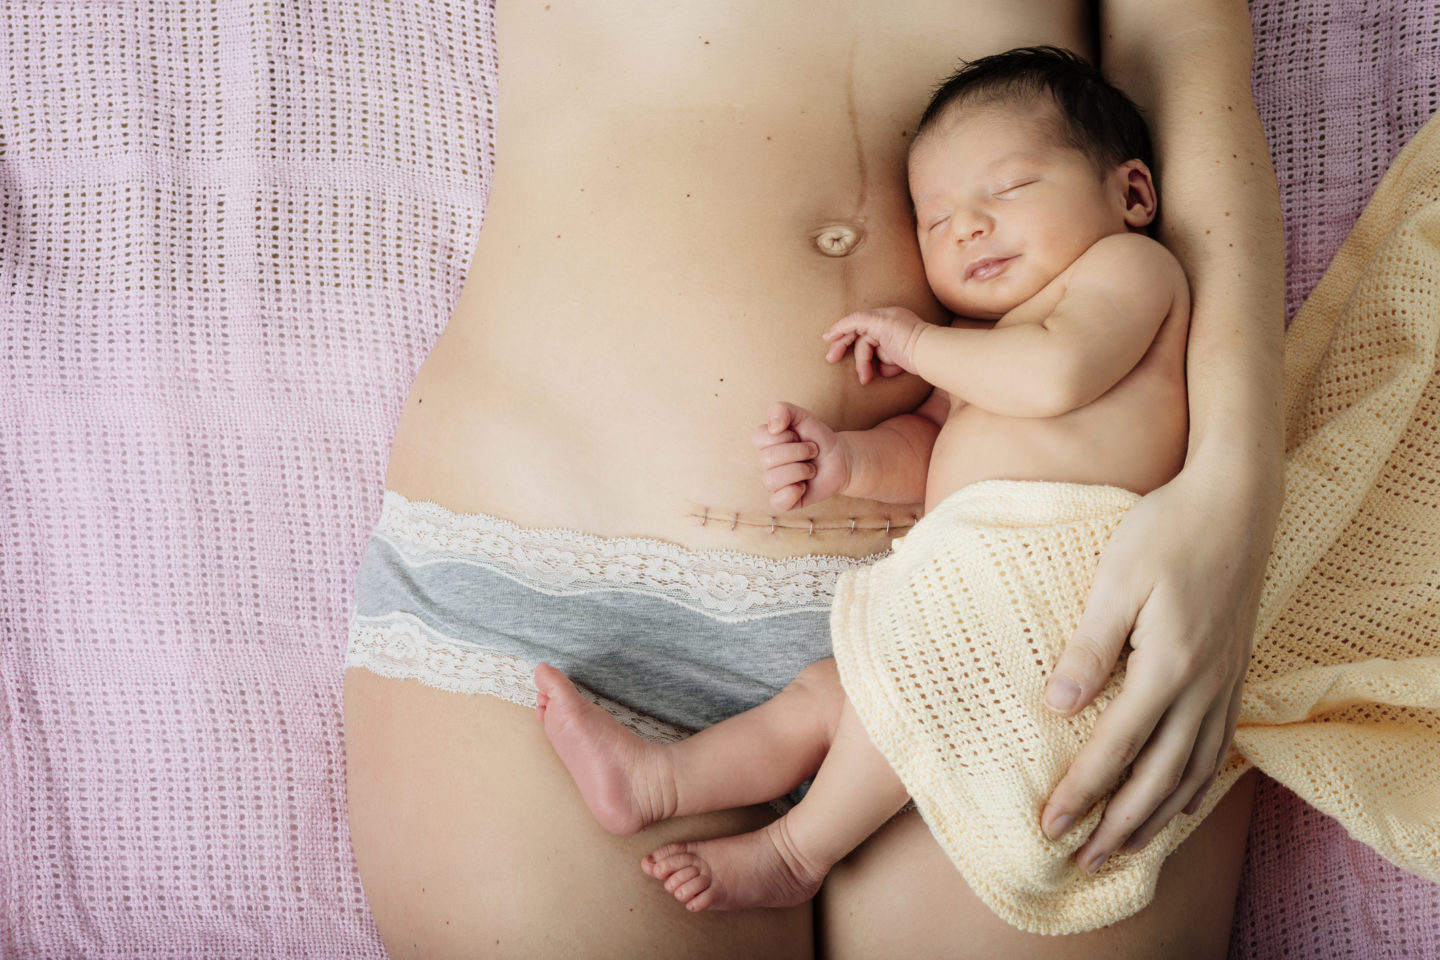 Here’s Why These Women Want You To Stop Shaming Them For Their C-section